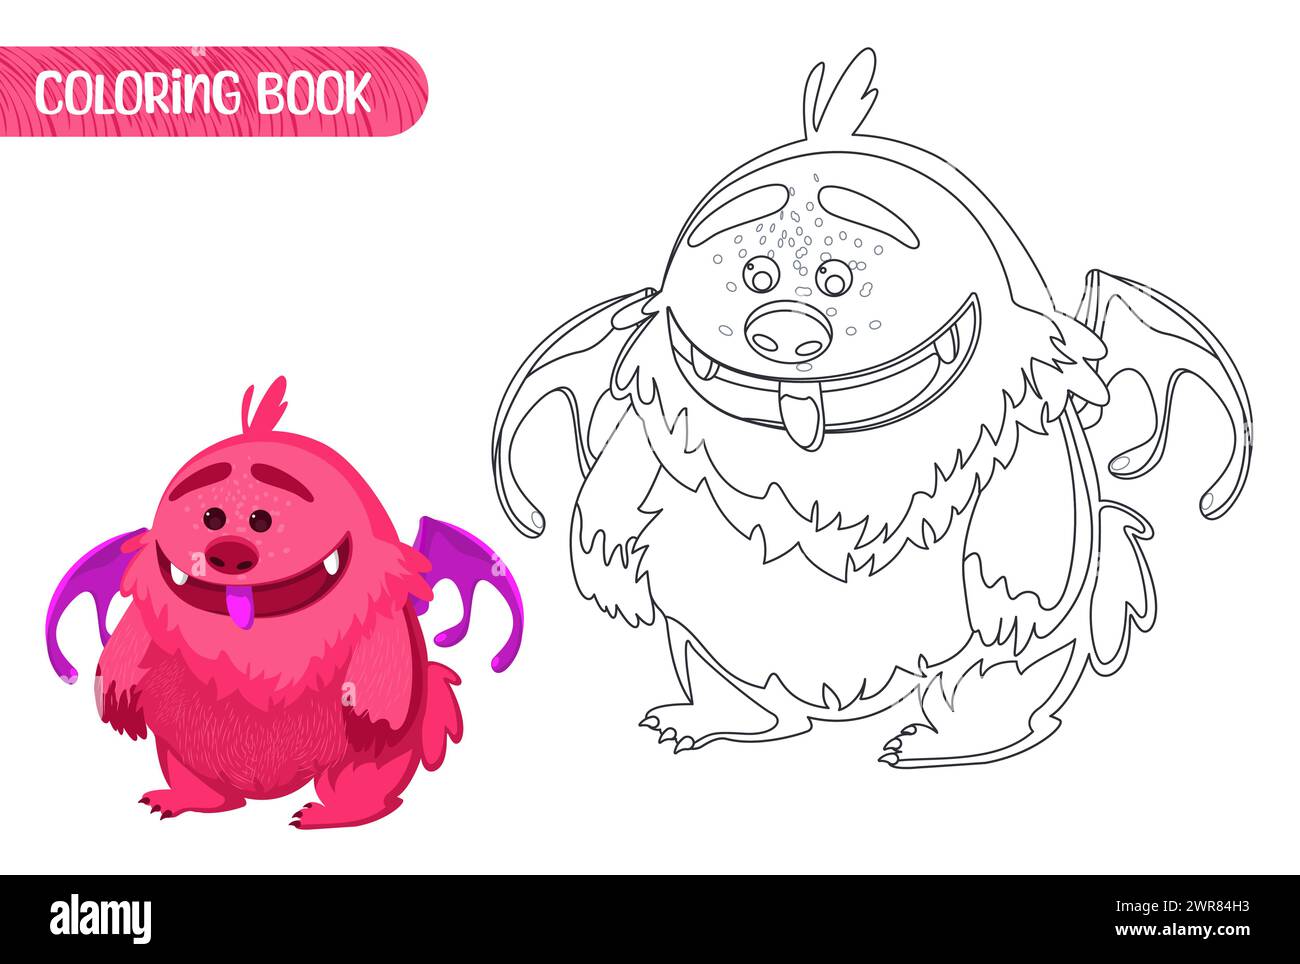 Coloring book for kids. Cute funny monster. Stock Vector